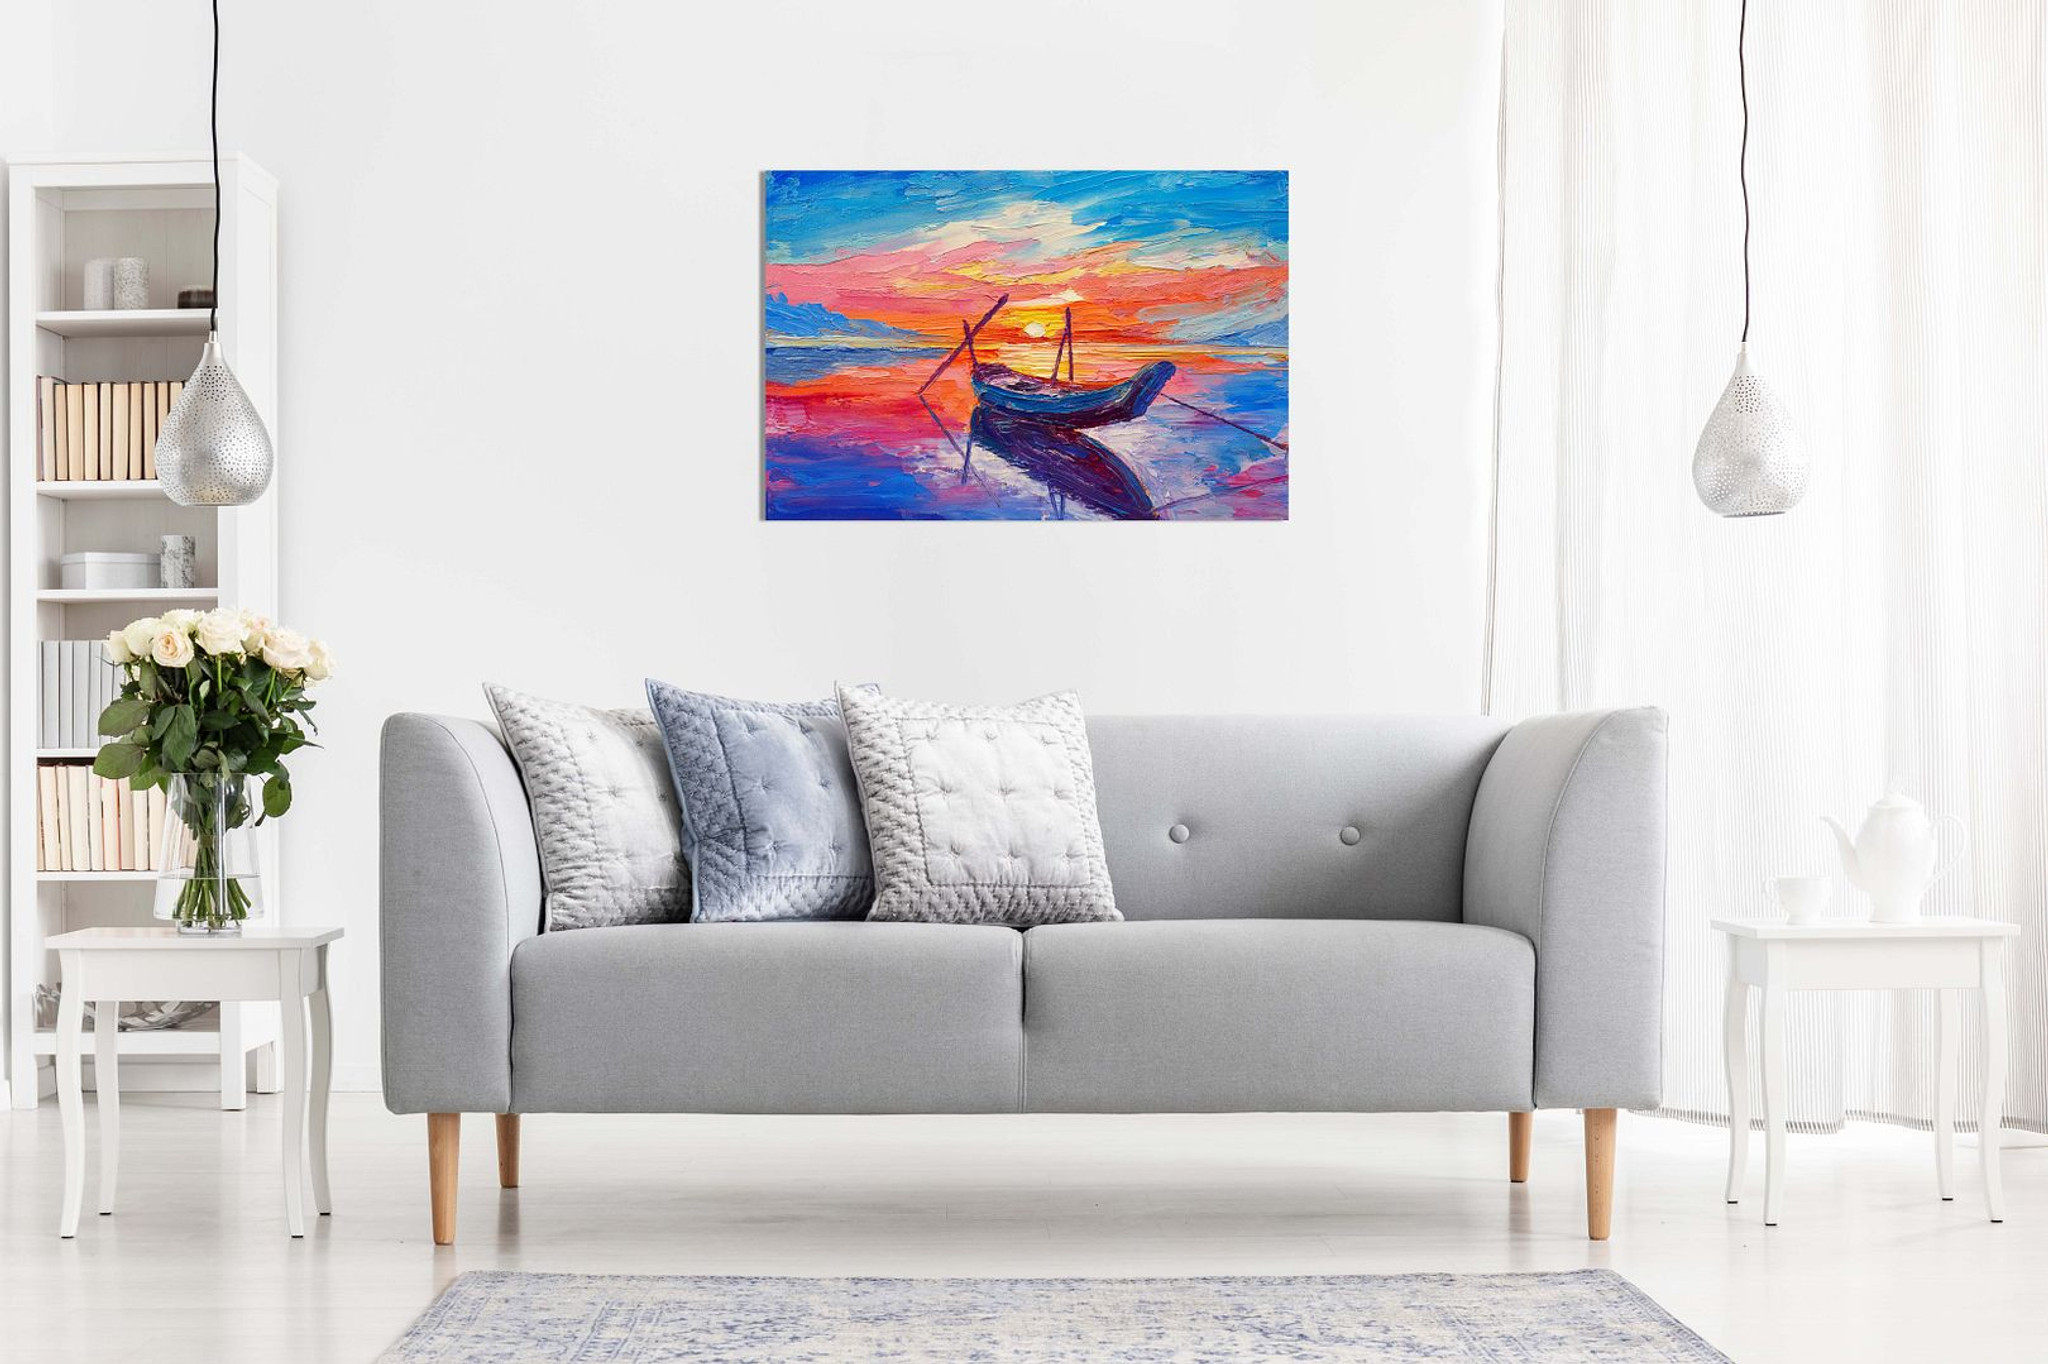  Fishing Tackle Canvas Paintings Wall Decor Living Room 5 Piece  Fishing Rod on the Boat Sunset Time Wall Decor Living Room Fishing Pictures  Contemporary Home Decor Framed Ready to Hang (60Wx40H) 